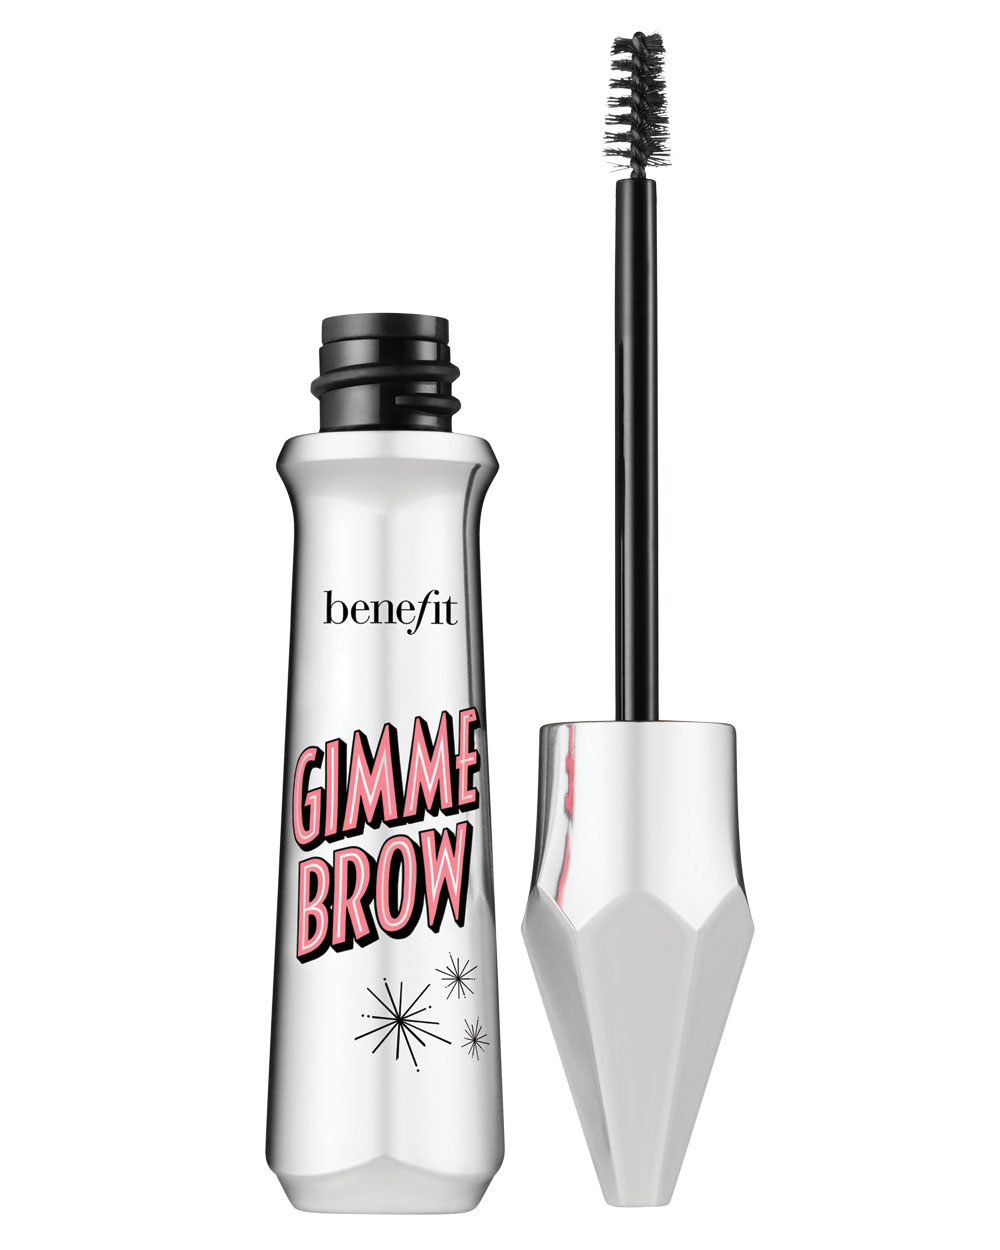 Benefit Gimme Brow, $45